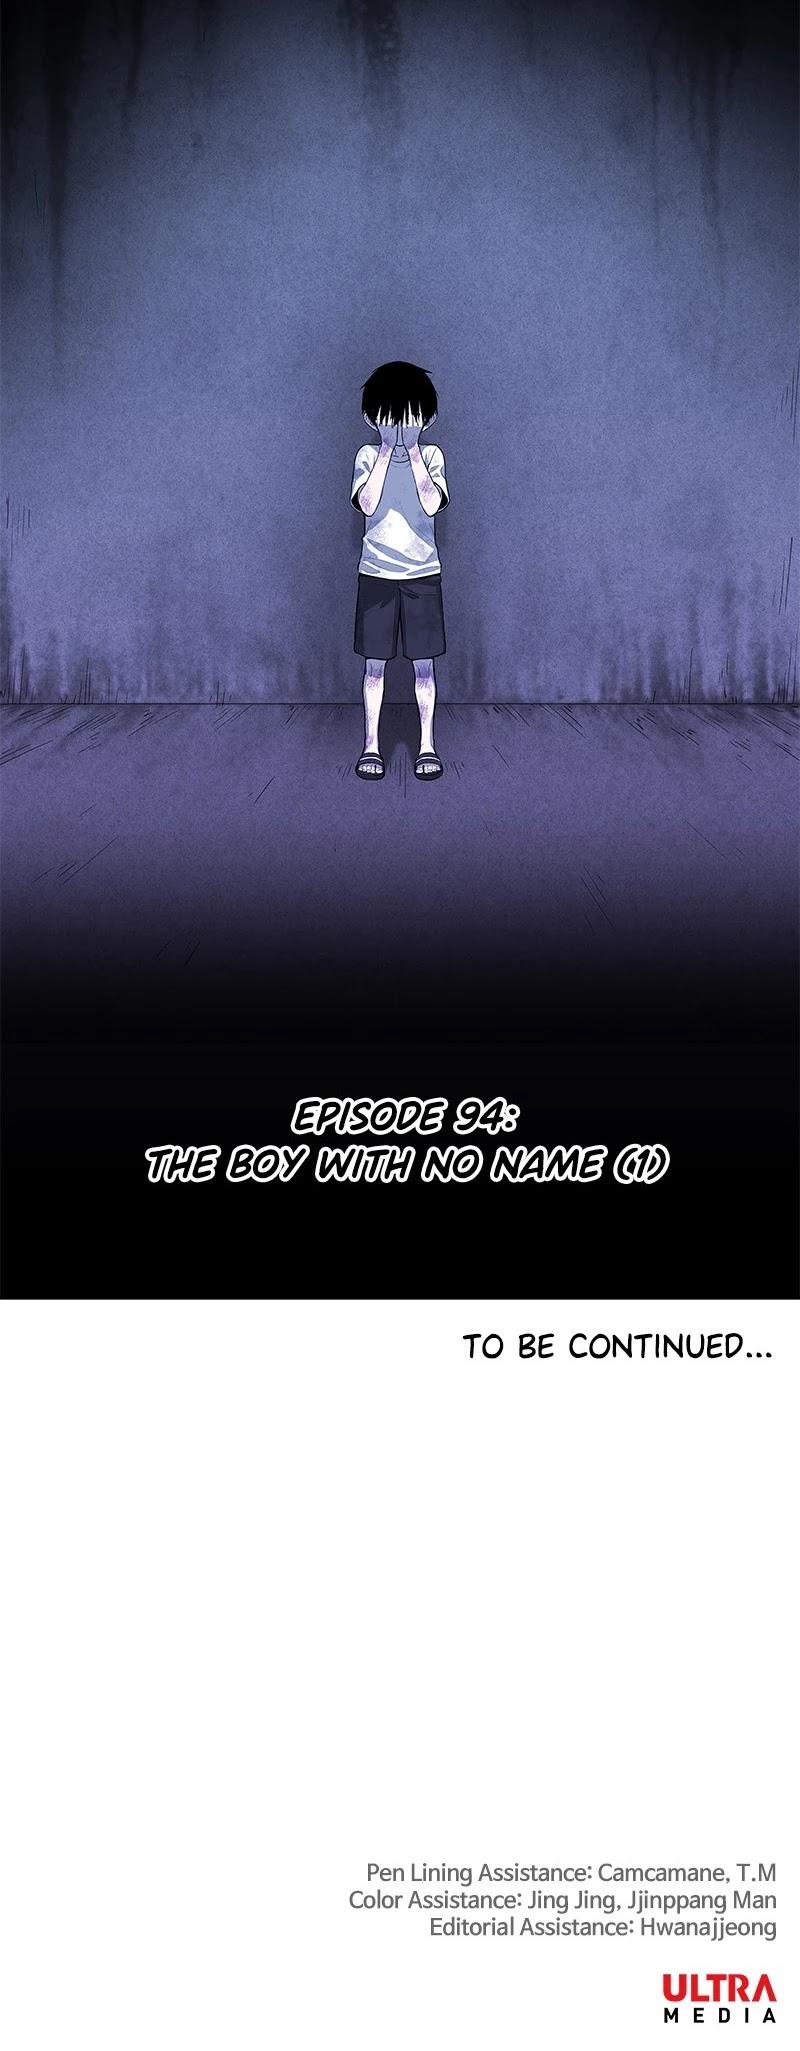 The Boxer Chapter 104: Ep. 94 - The Boy With No Name (1) page 45 - 